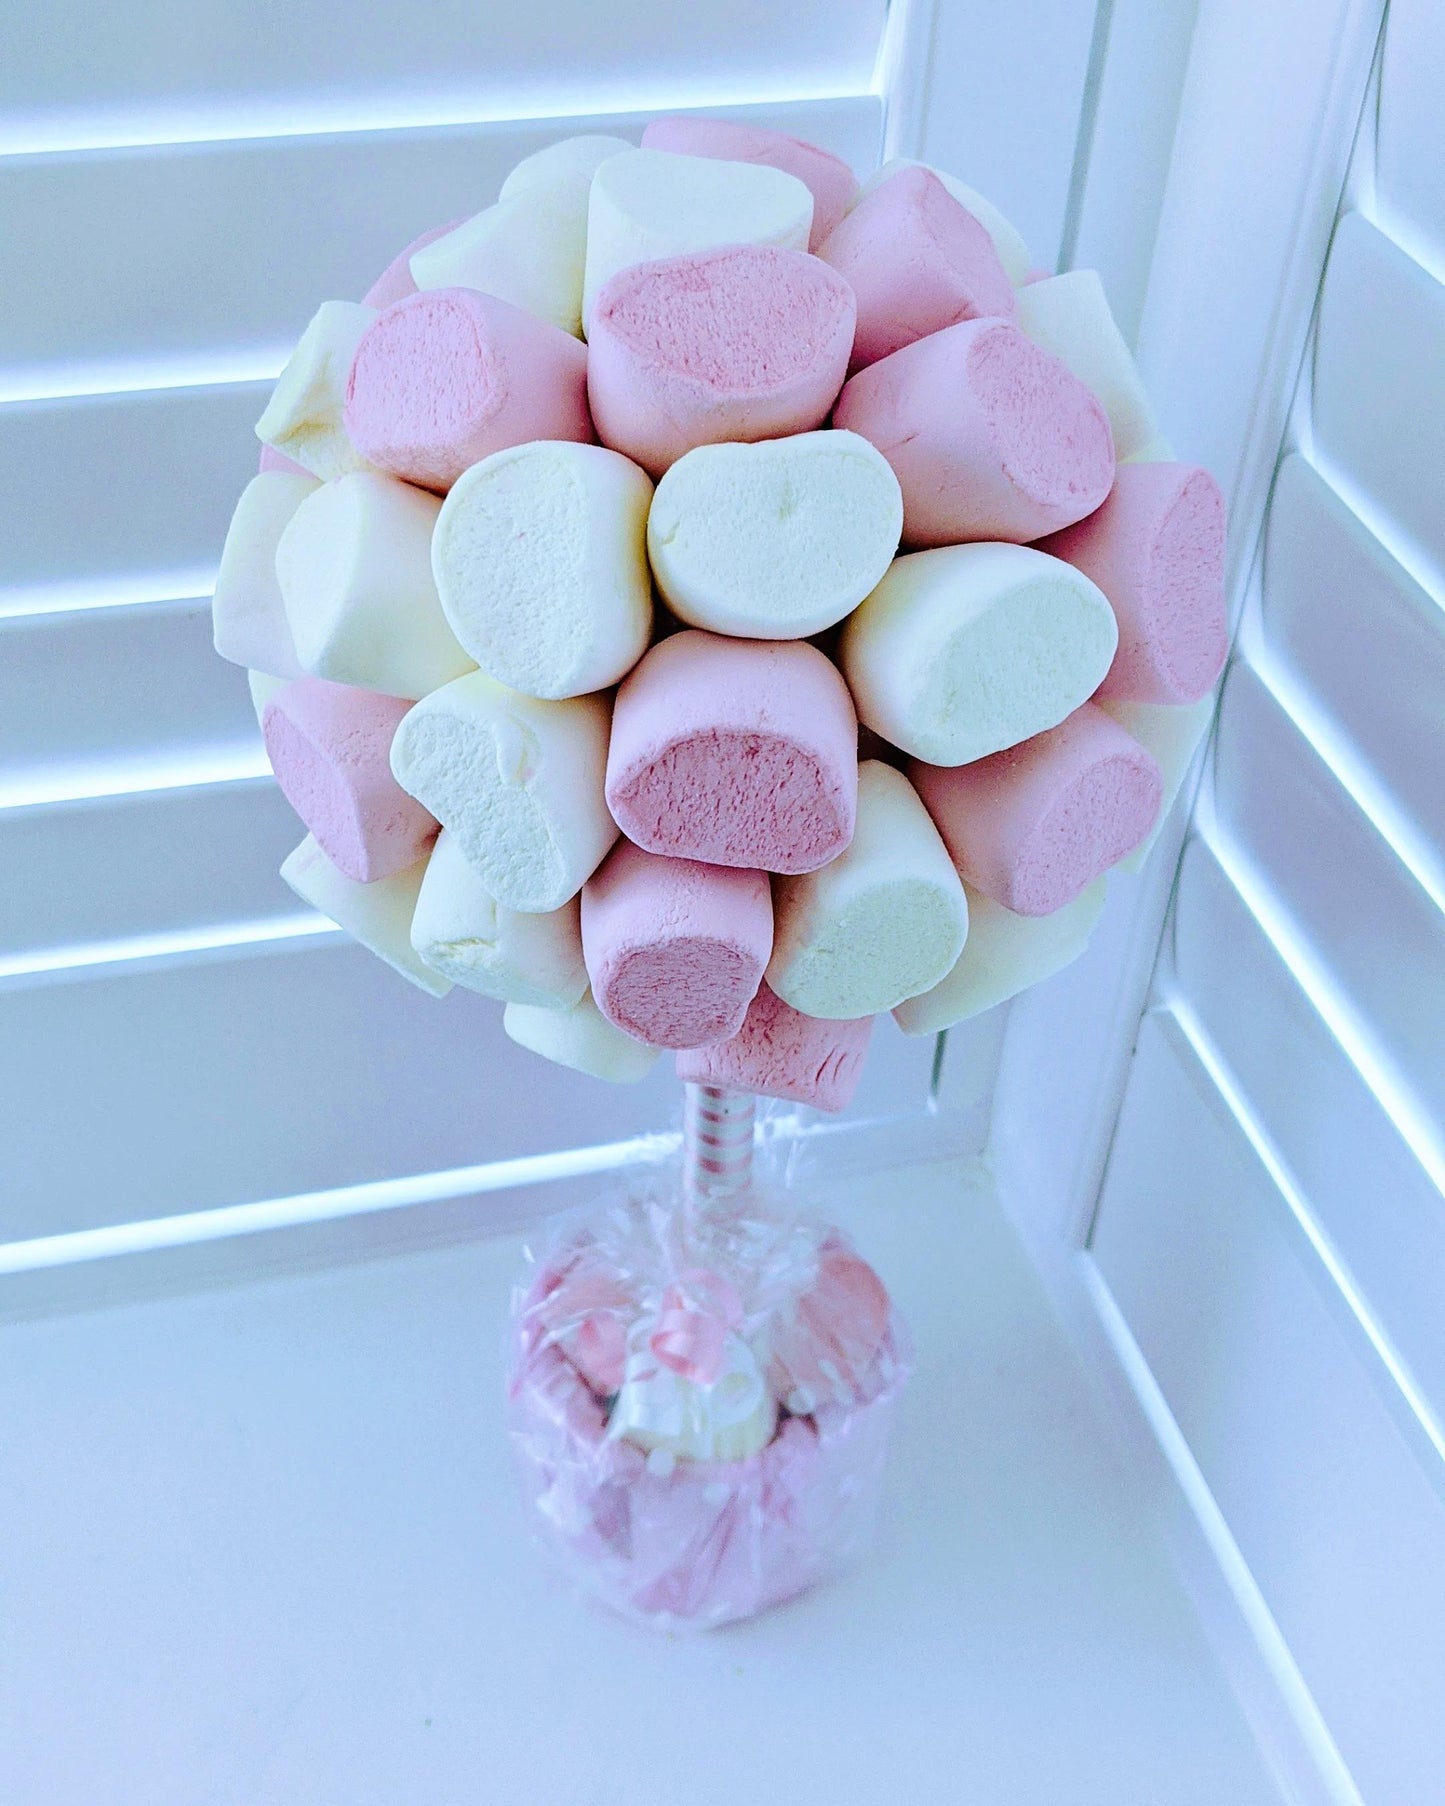 Pink and white Marshmallow sweet tree in UK